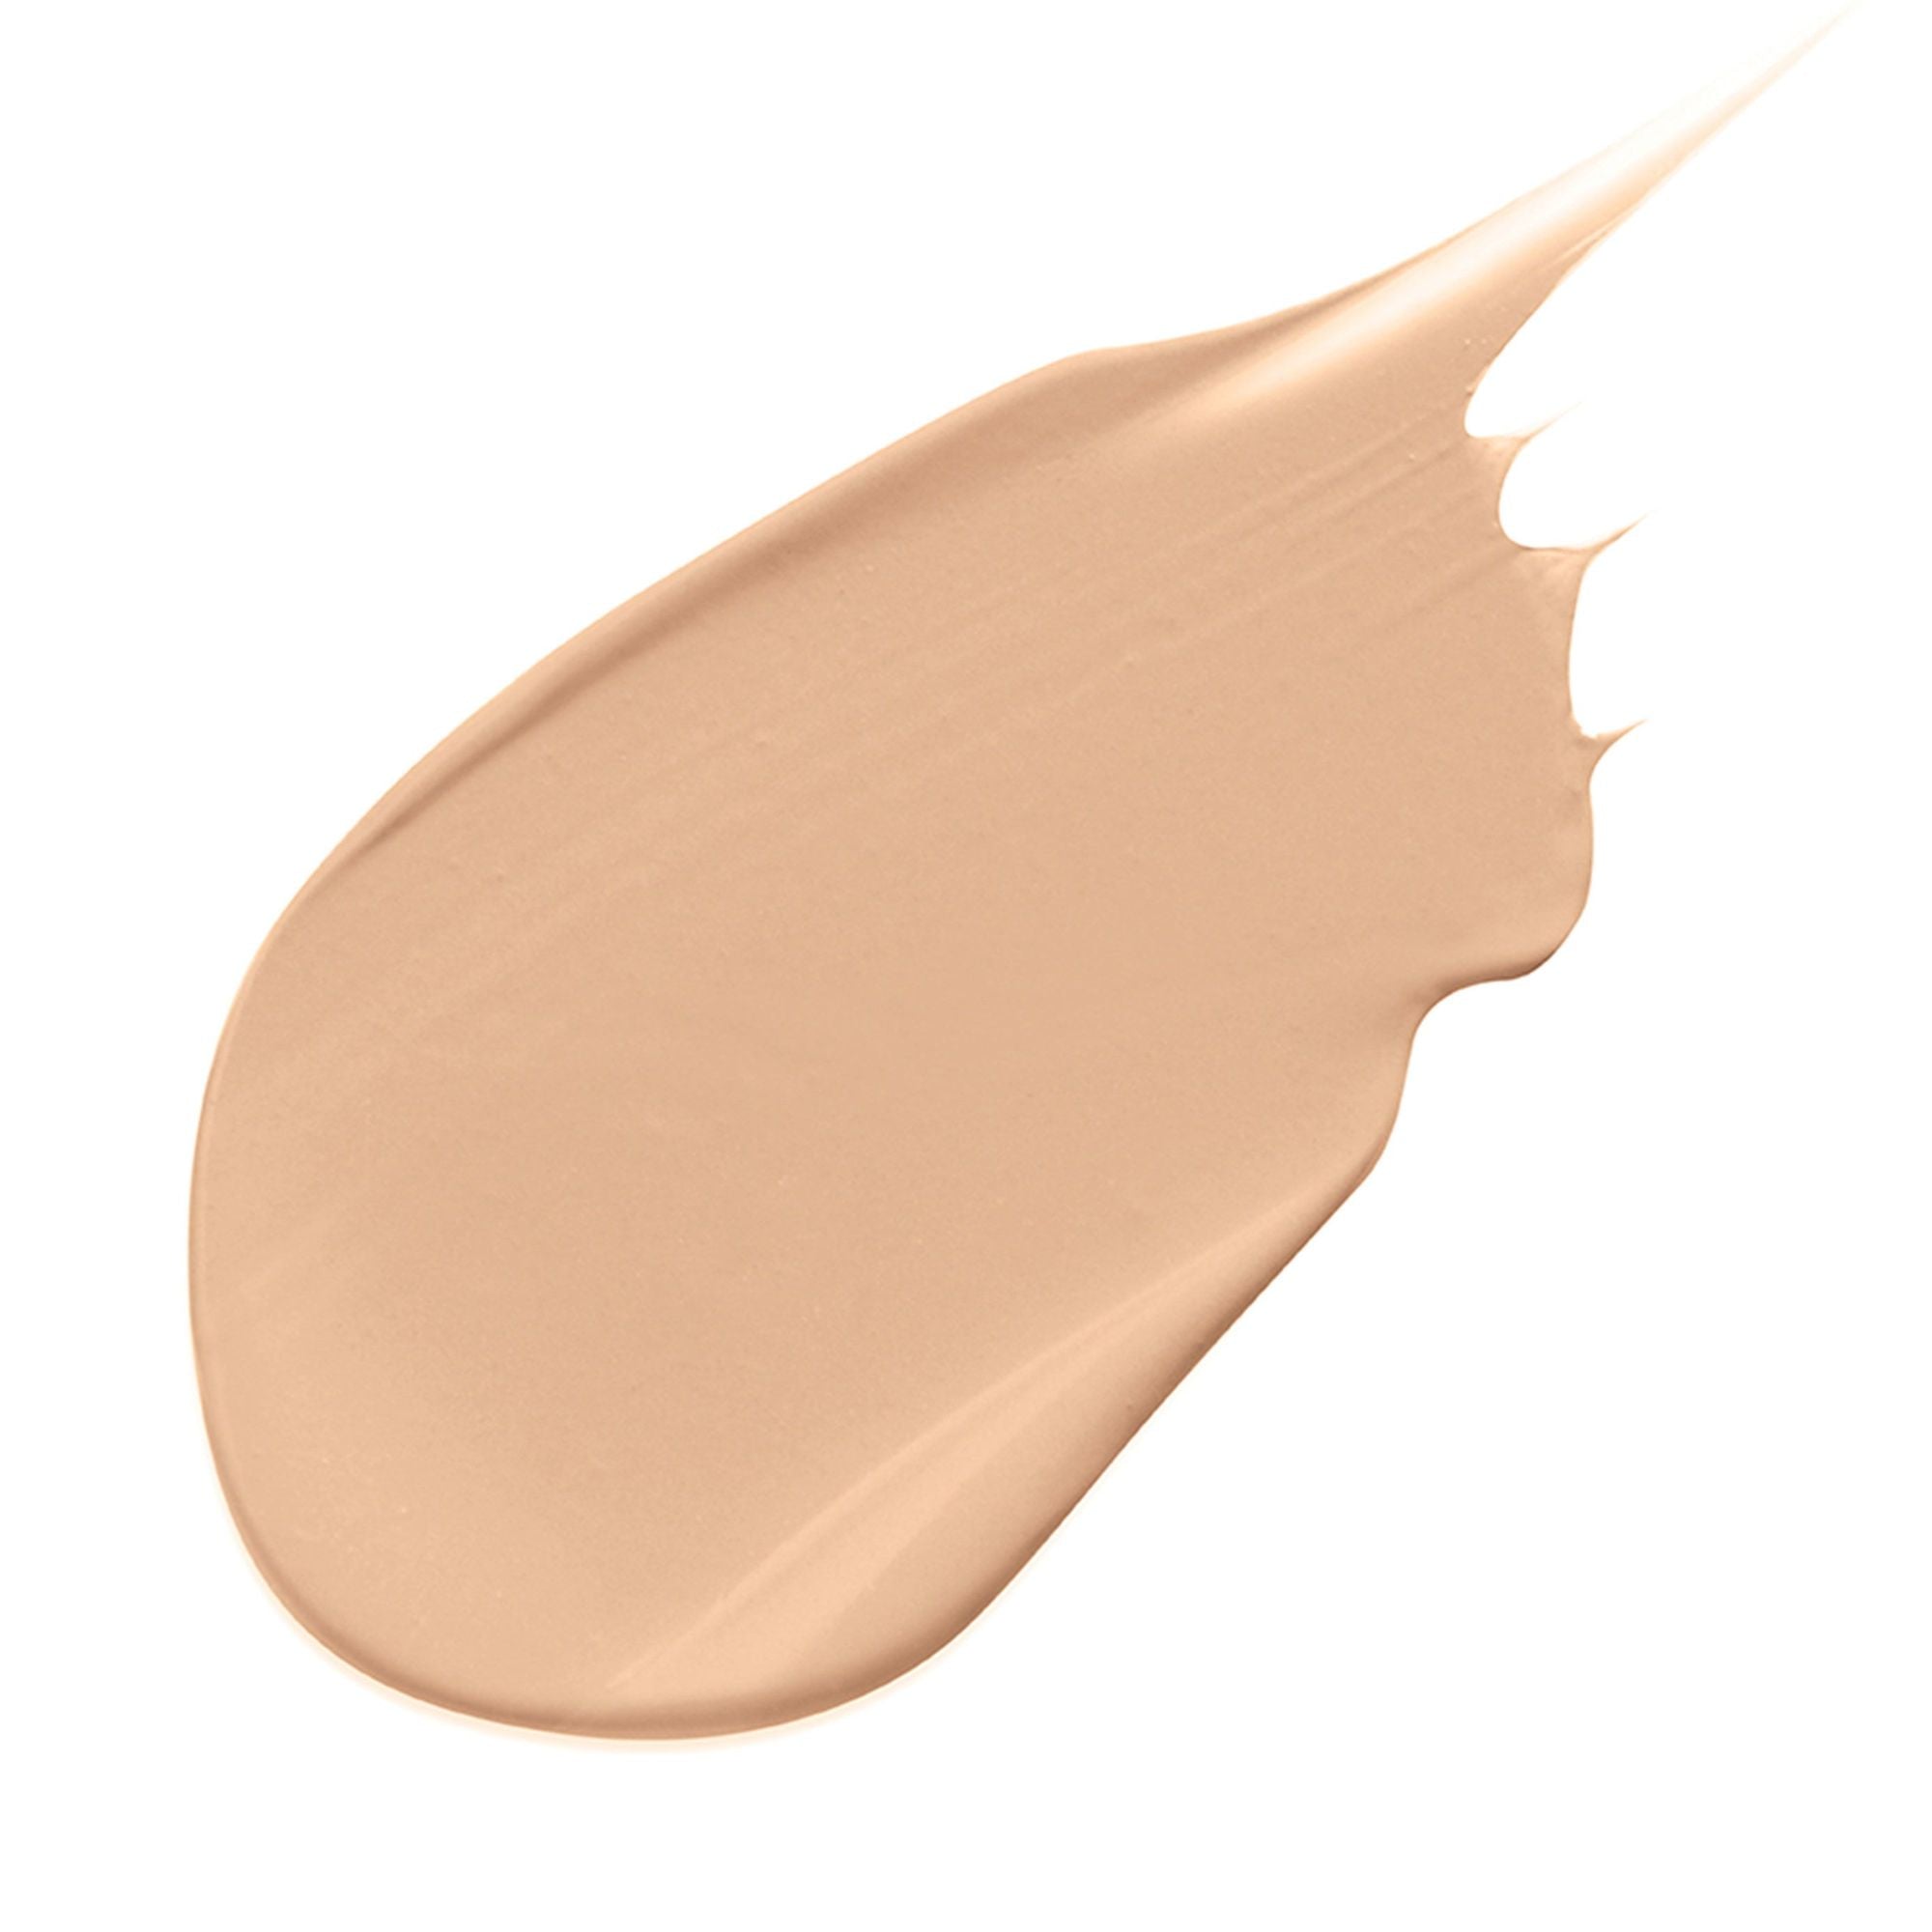 Glow Time Full Coverage Mineral BB Cream